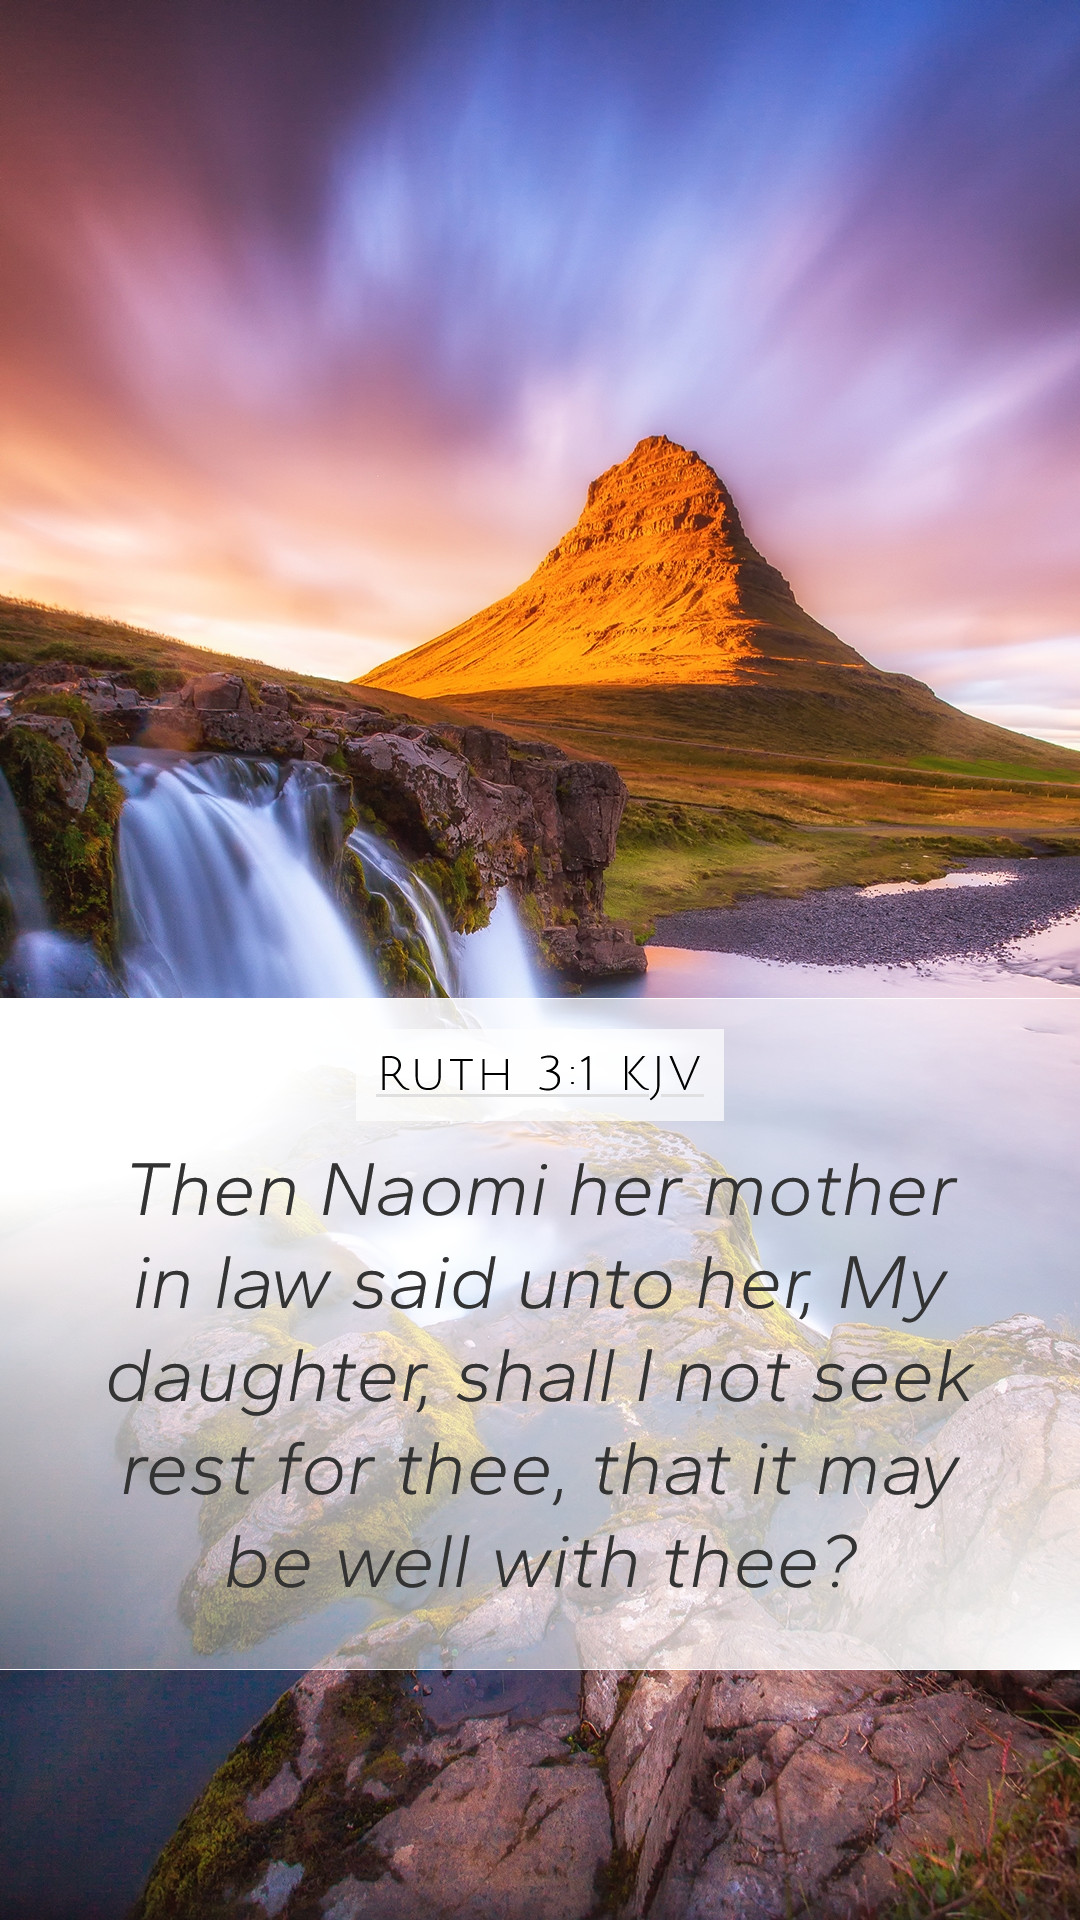 Ruth 3:1 KJV Mobile Phone Wallpaper Naomi her mother in law said unto her, My